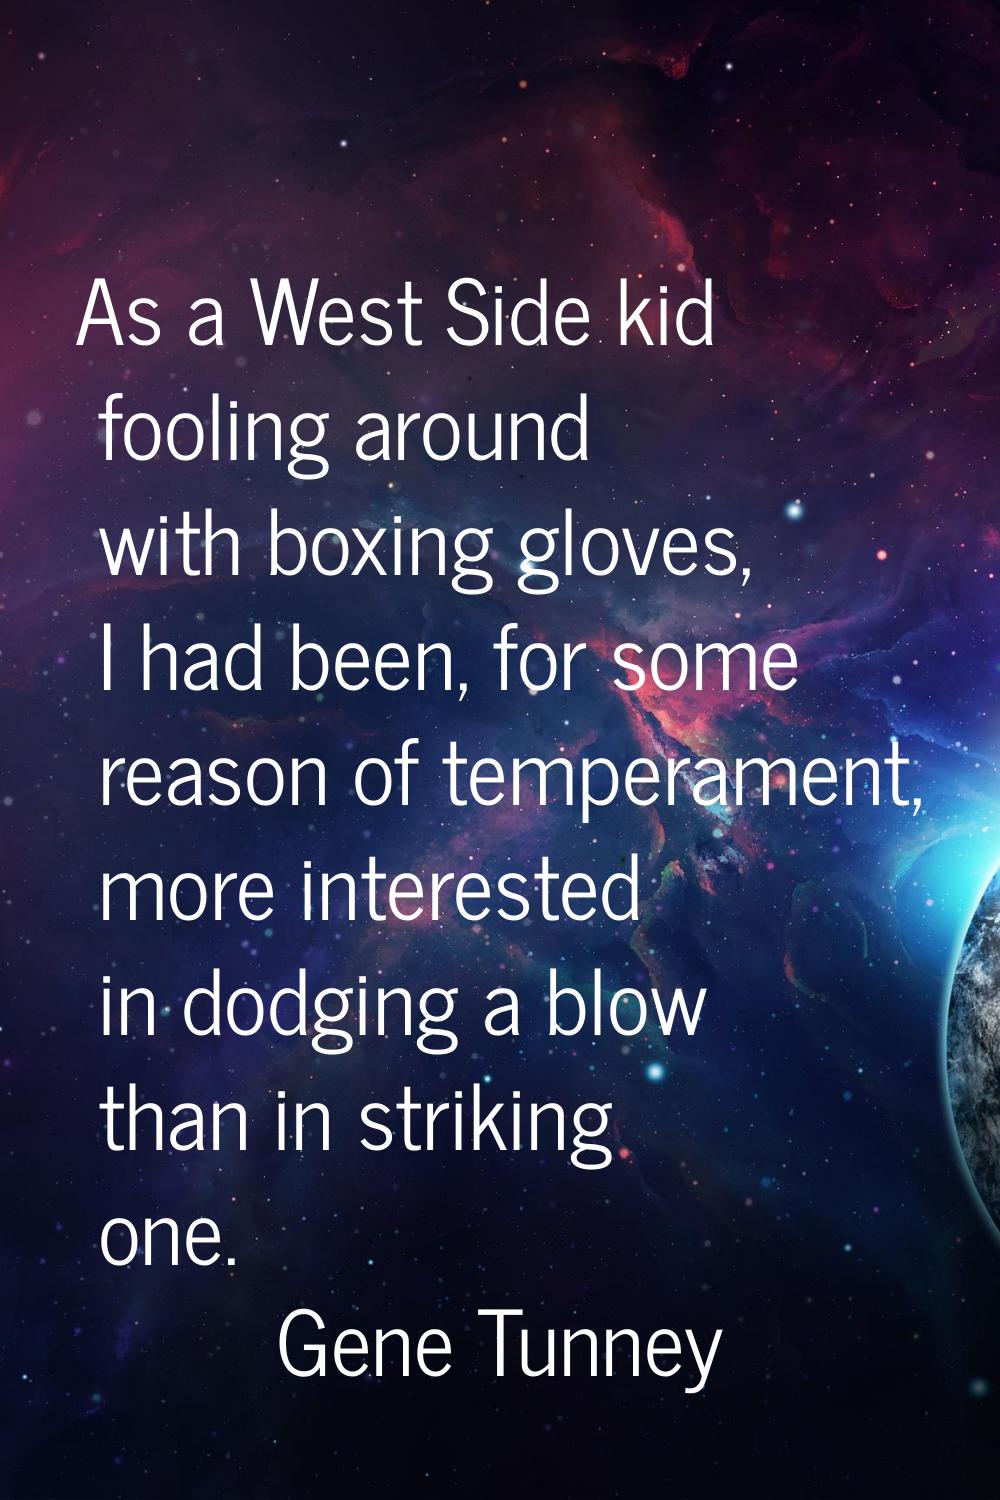 As a West Side kid fooling around with boxing gloves, I had been, for some reason of temperament, m